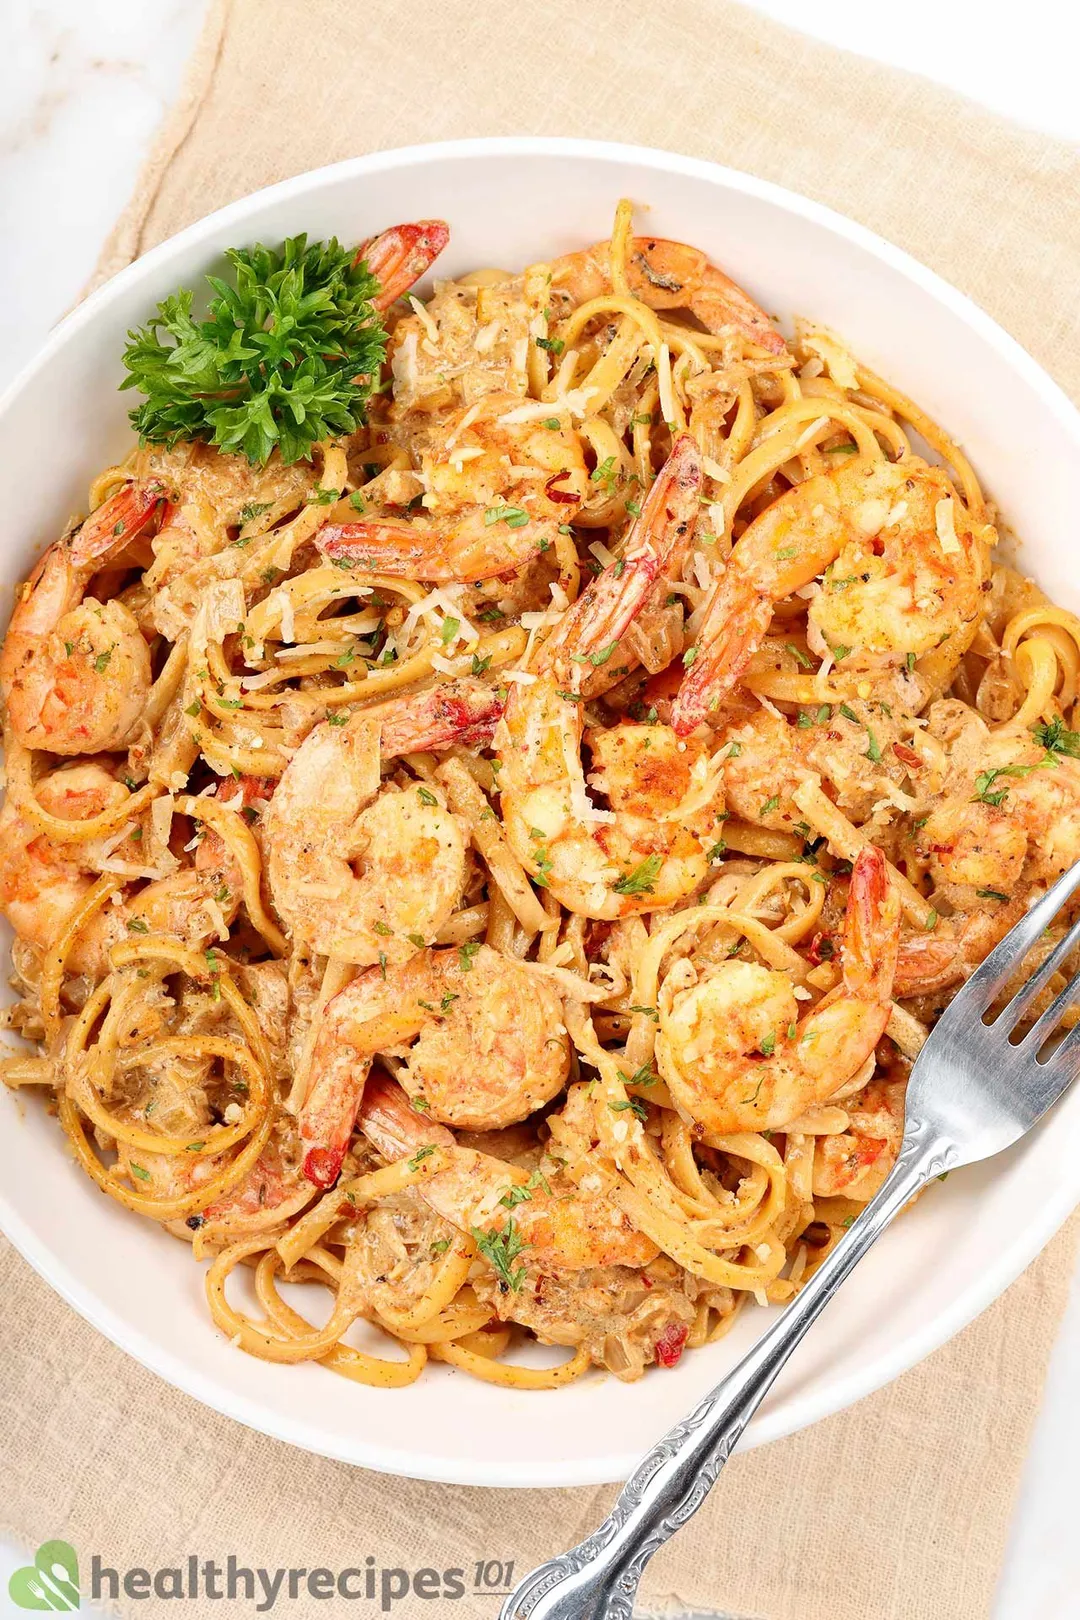 What Is Shrimp Alfredo Recipes Sauce Made of